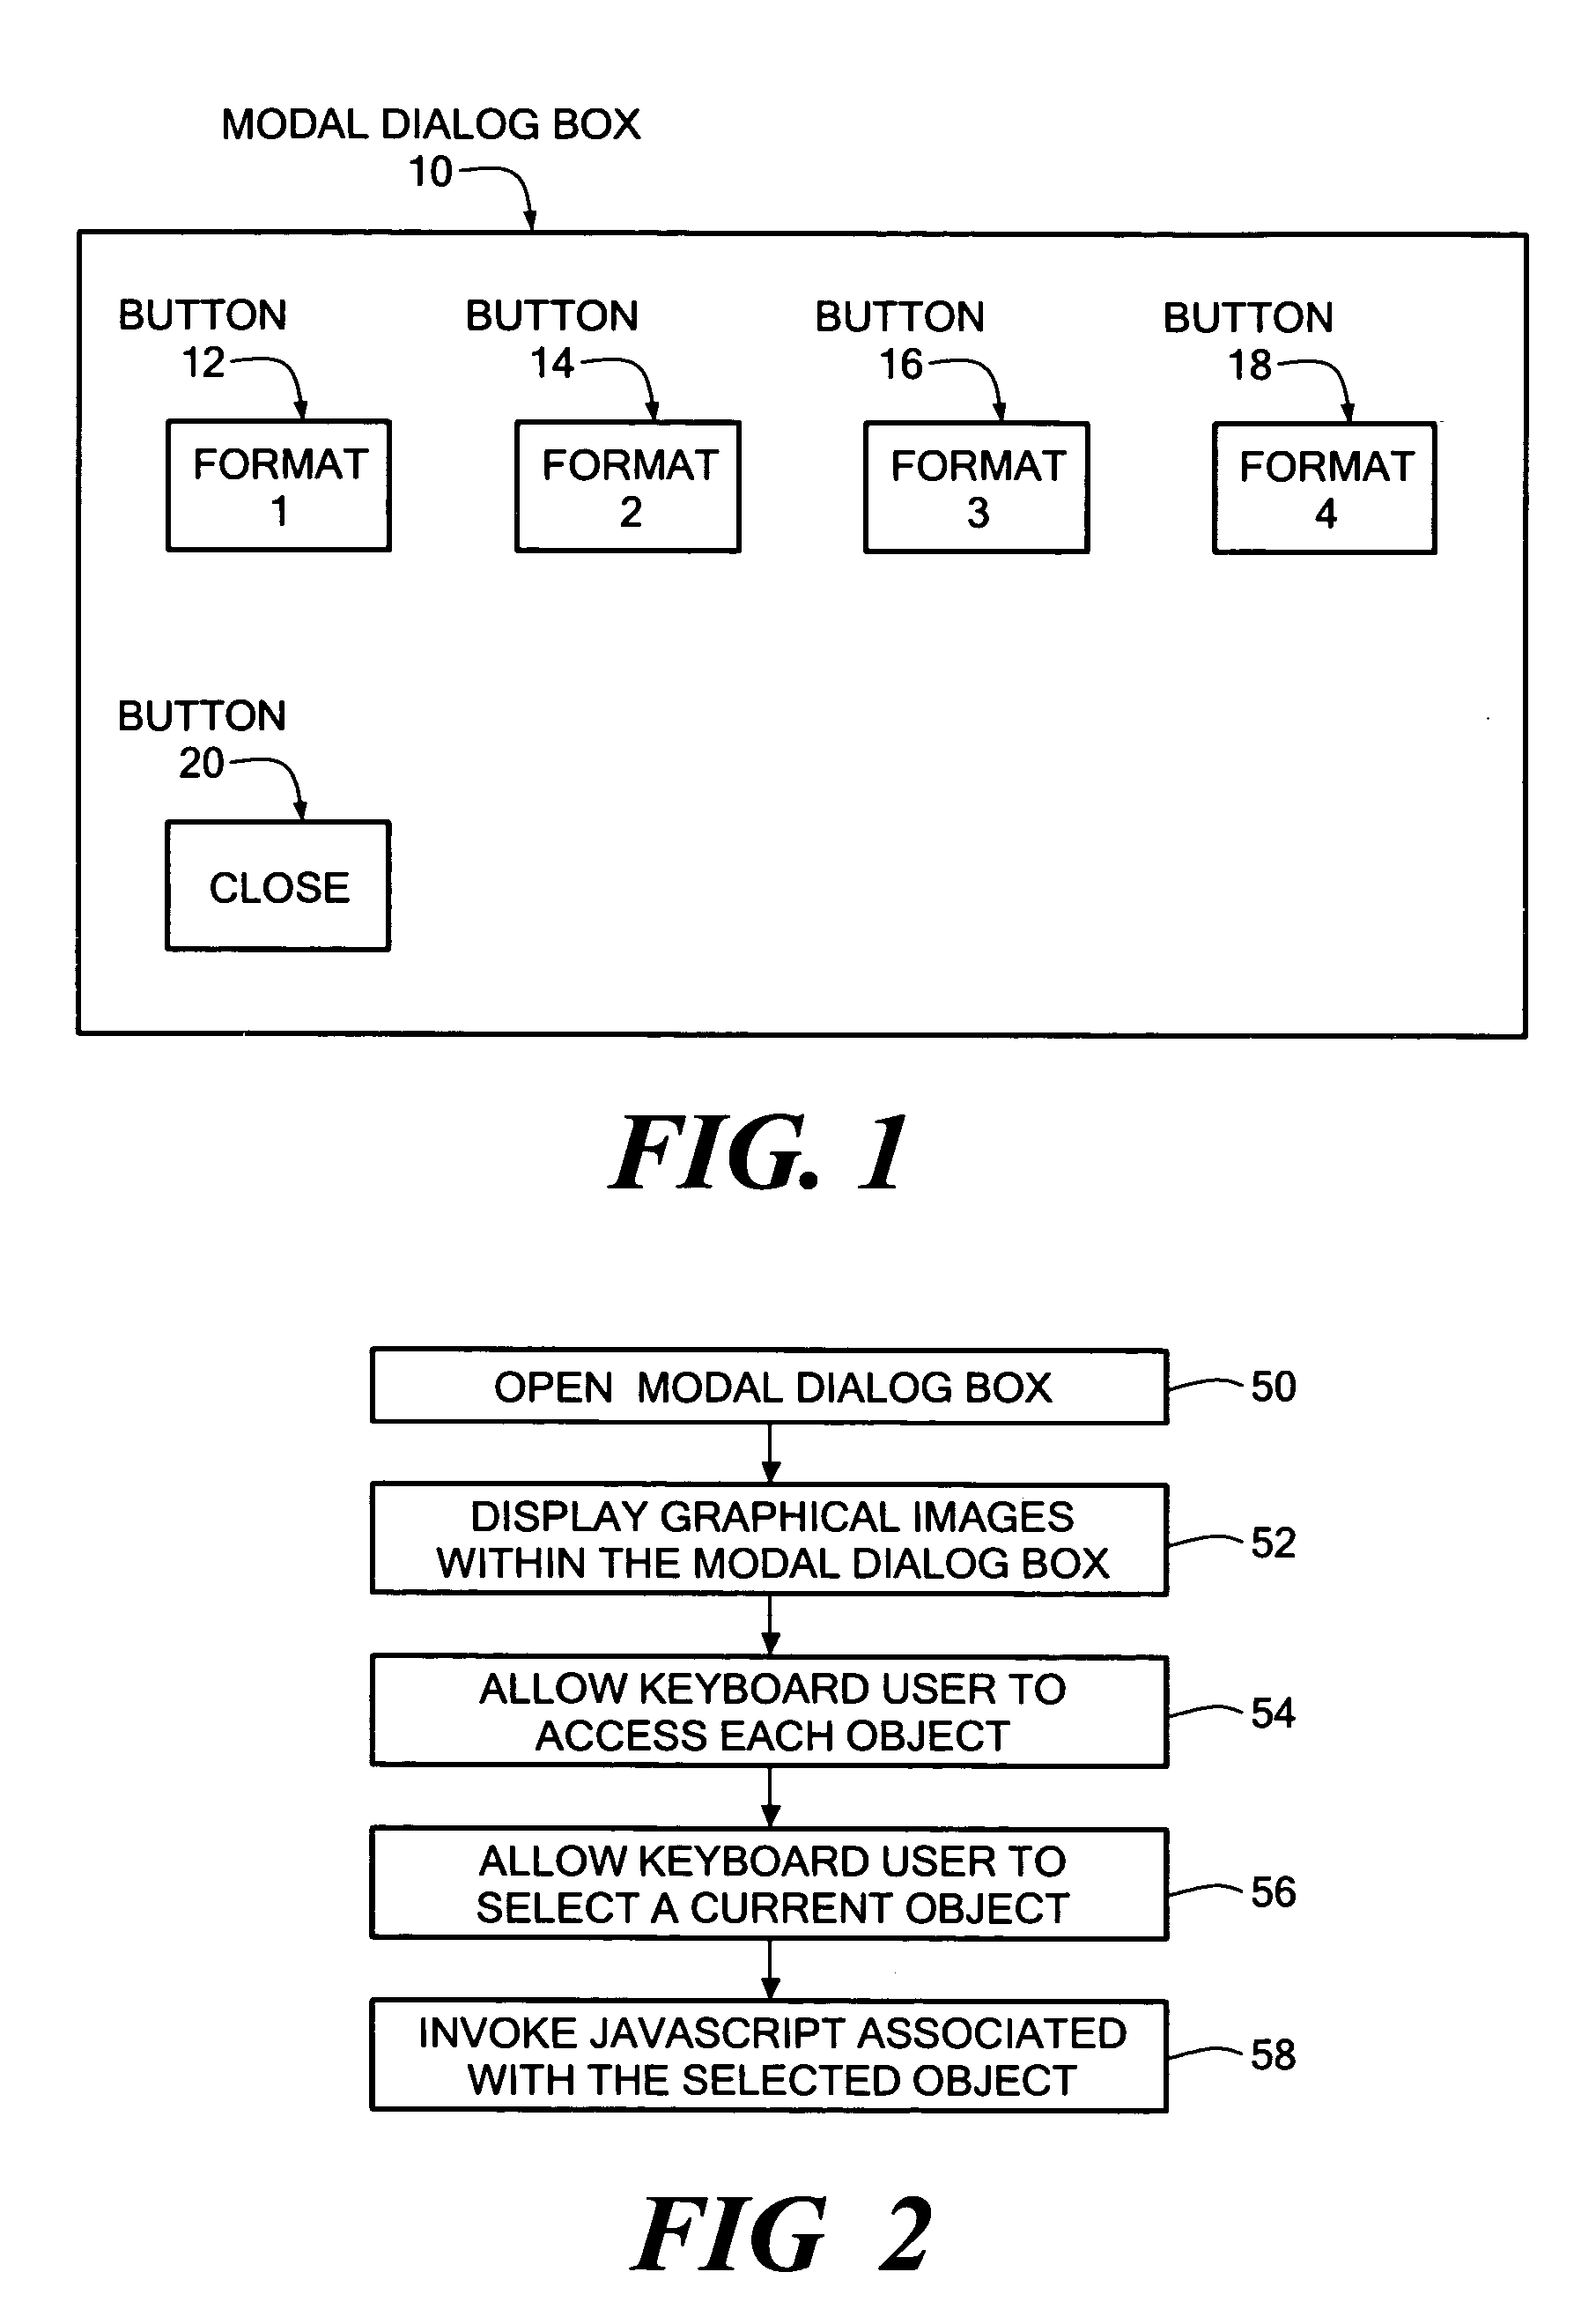 Method and system for providing an accessible object on a modal dialog box